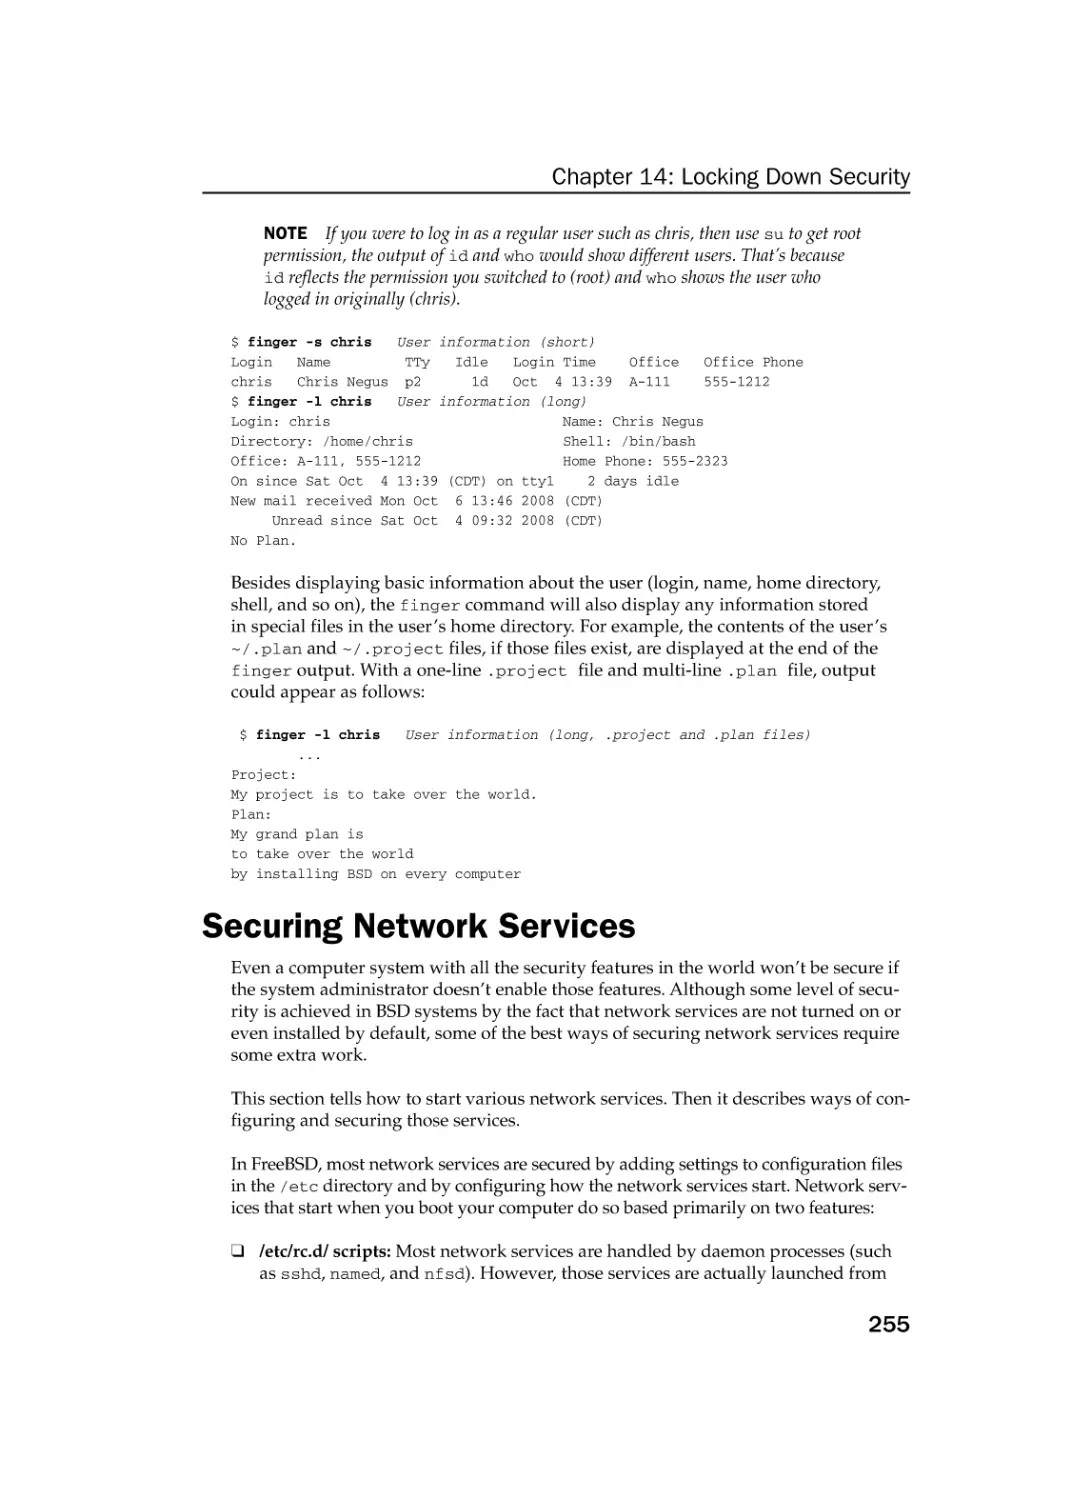 Securing Network Services